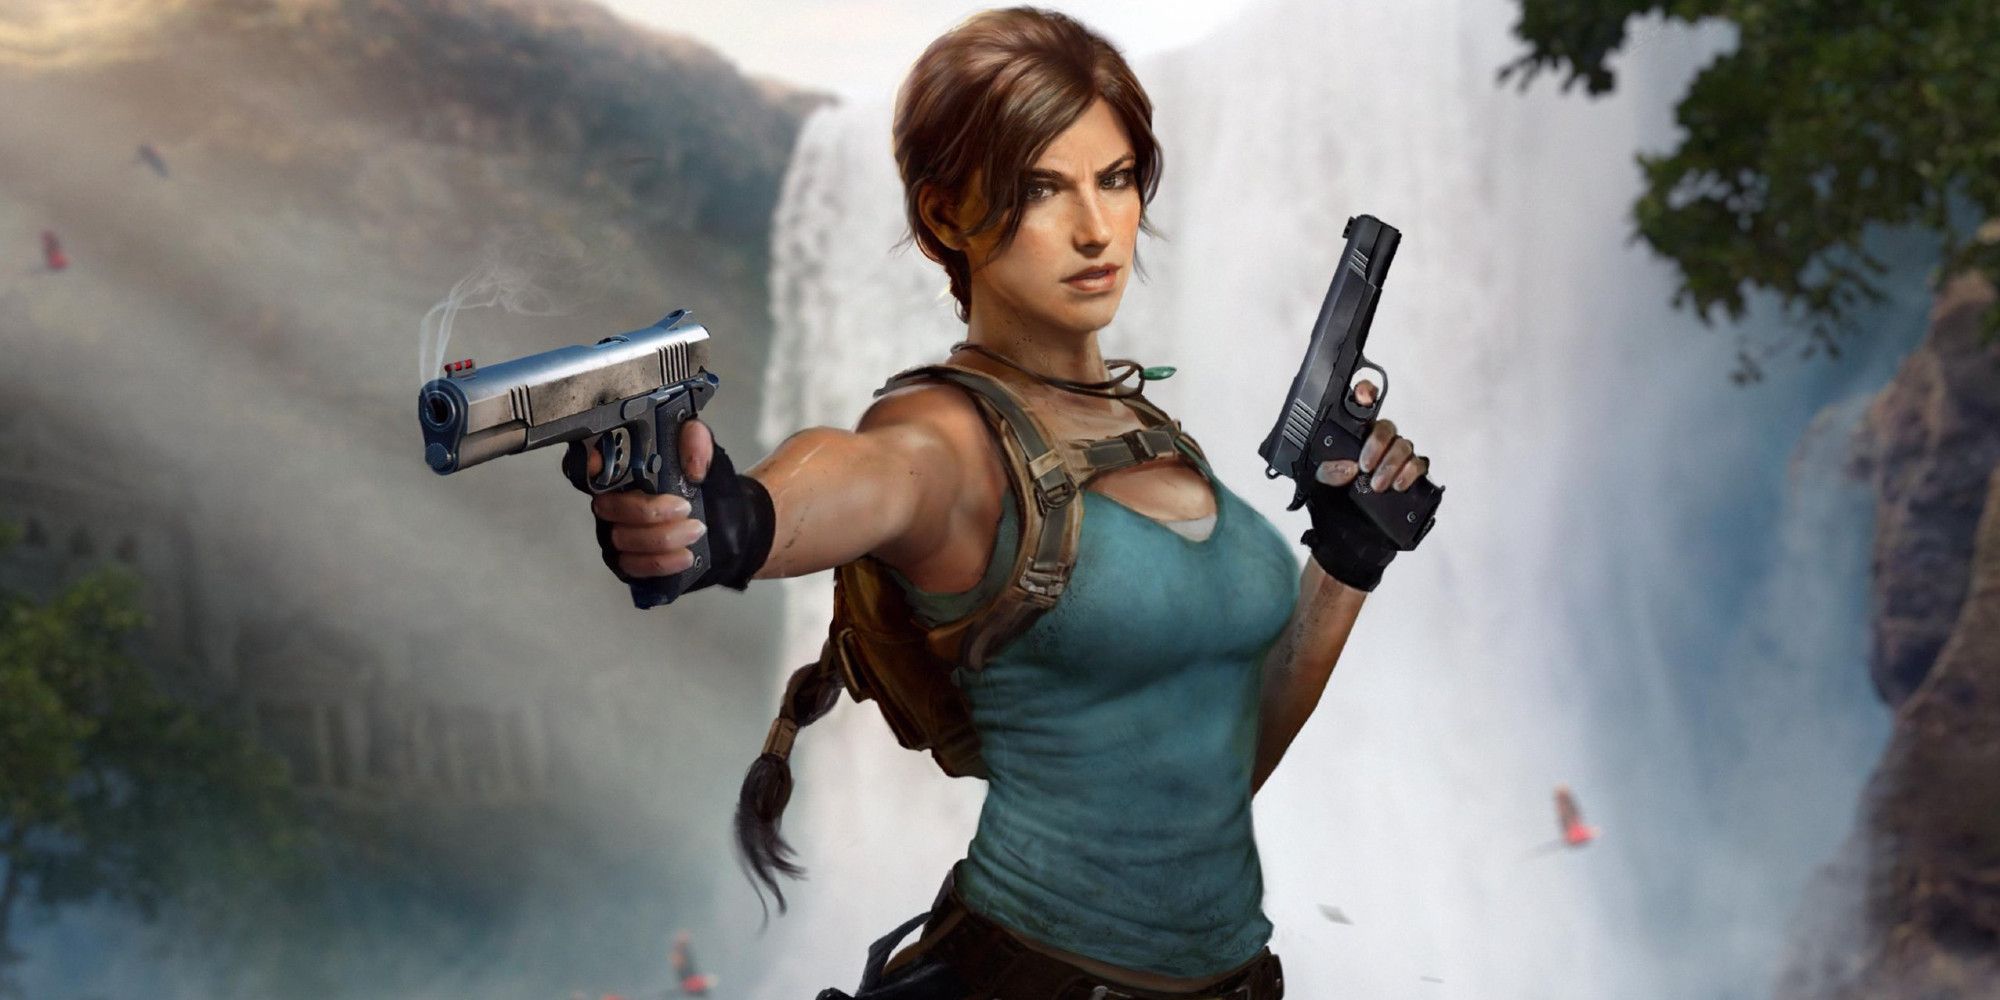 Lara Croft in her classic blue tank top and brown shorts holding two pistols